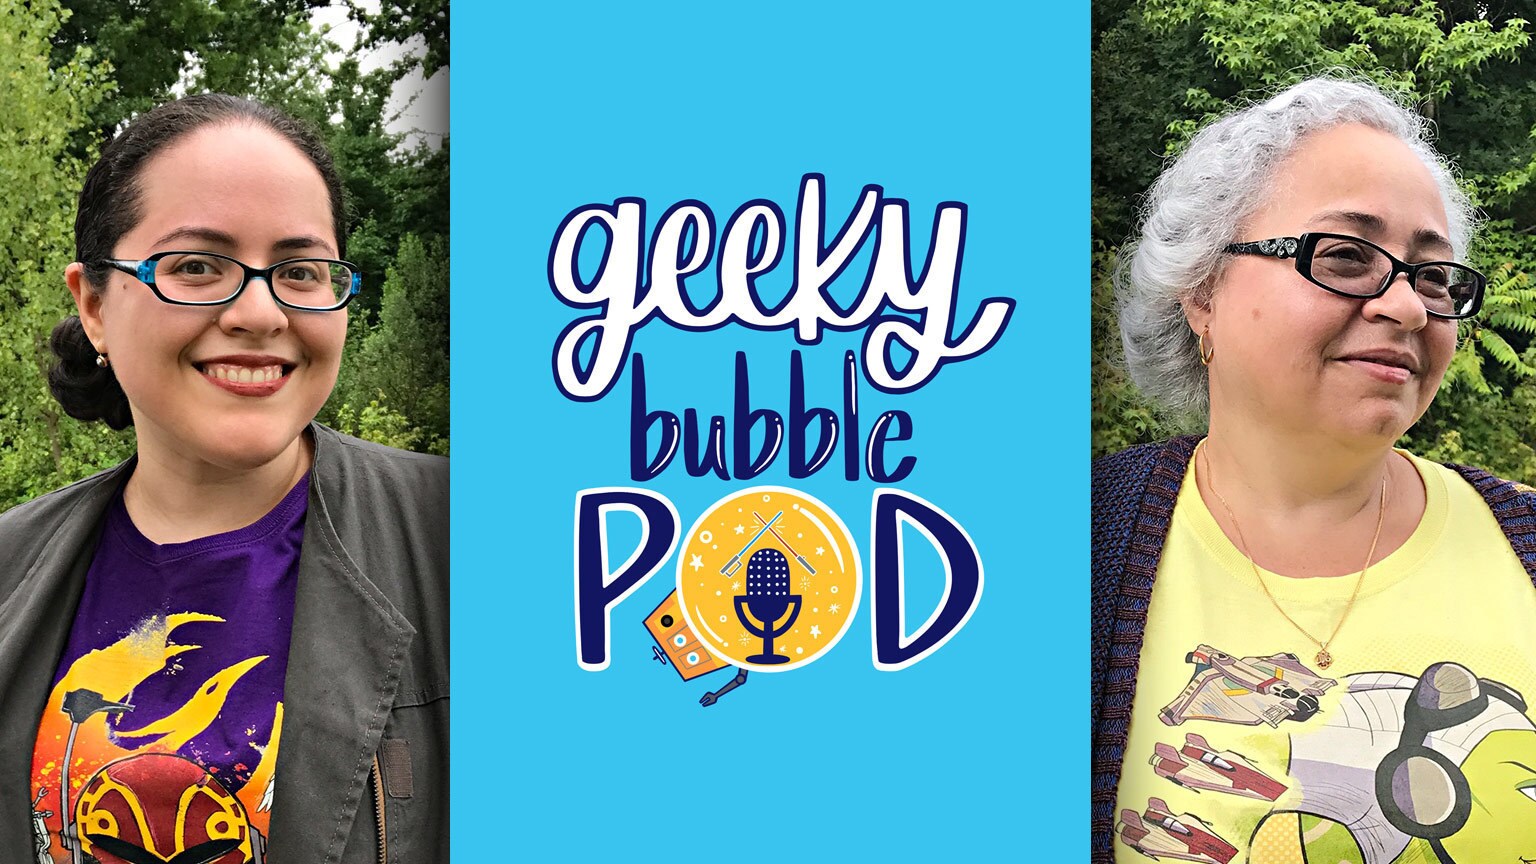 Maria and Johna with the Geeky Bubble Pod logo